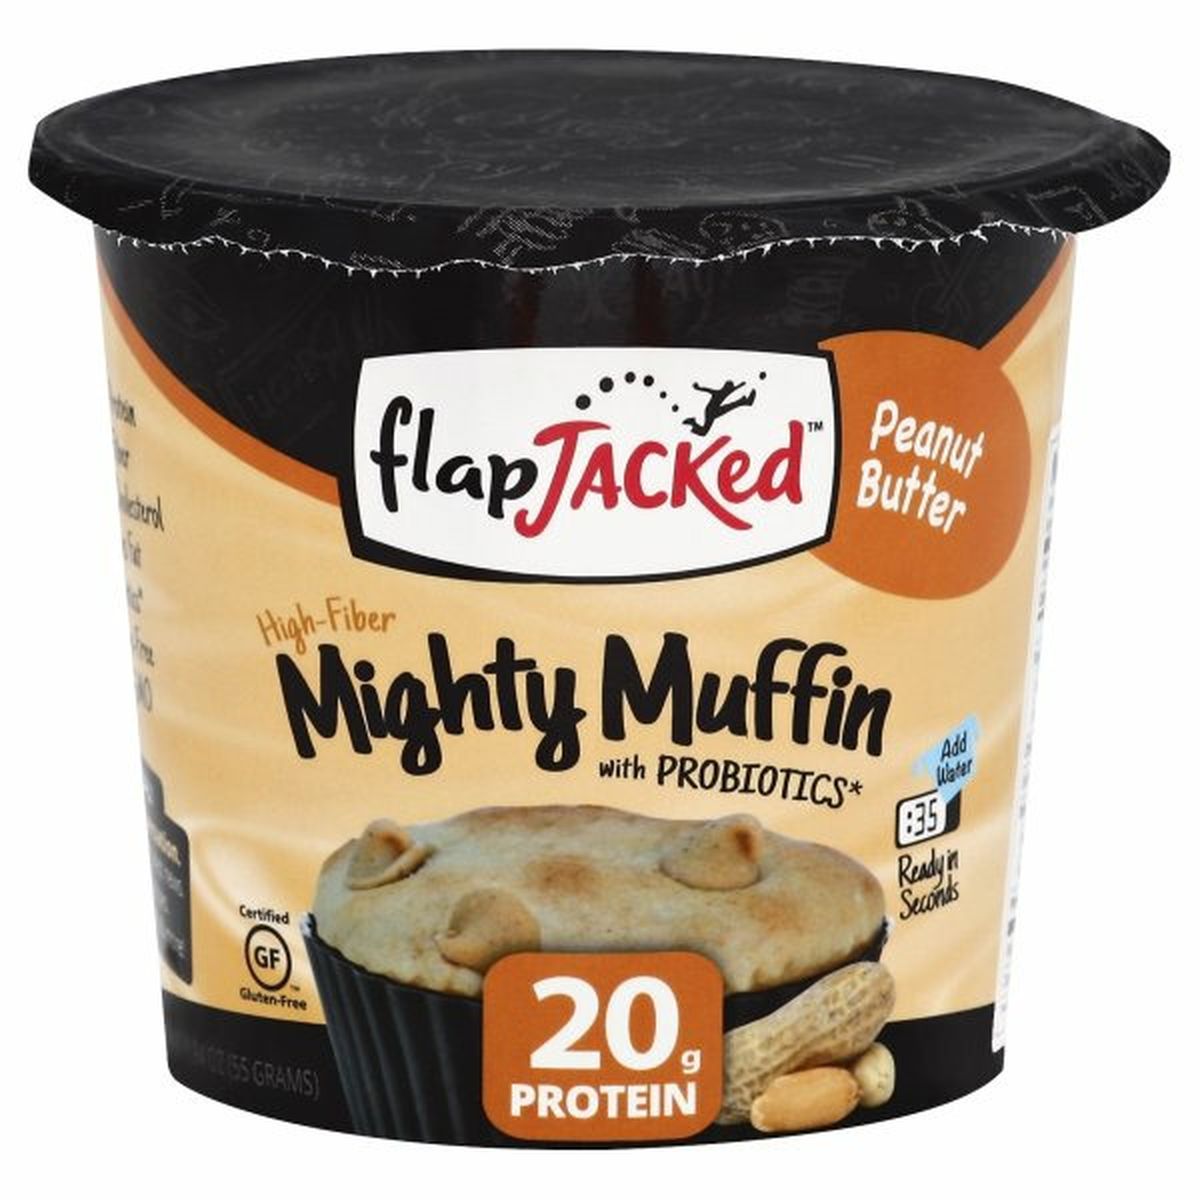 Calories in FlapJacked Mighty Muffin, Peanut Butter